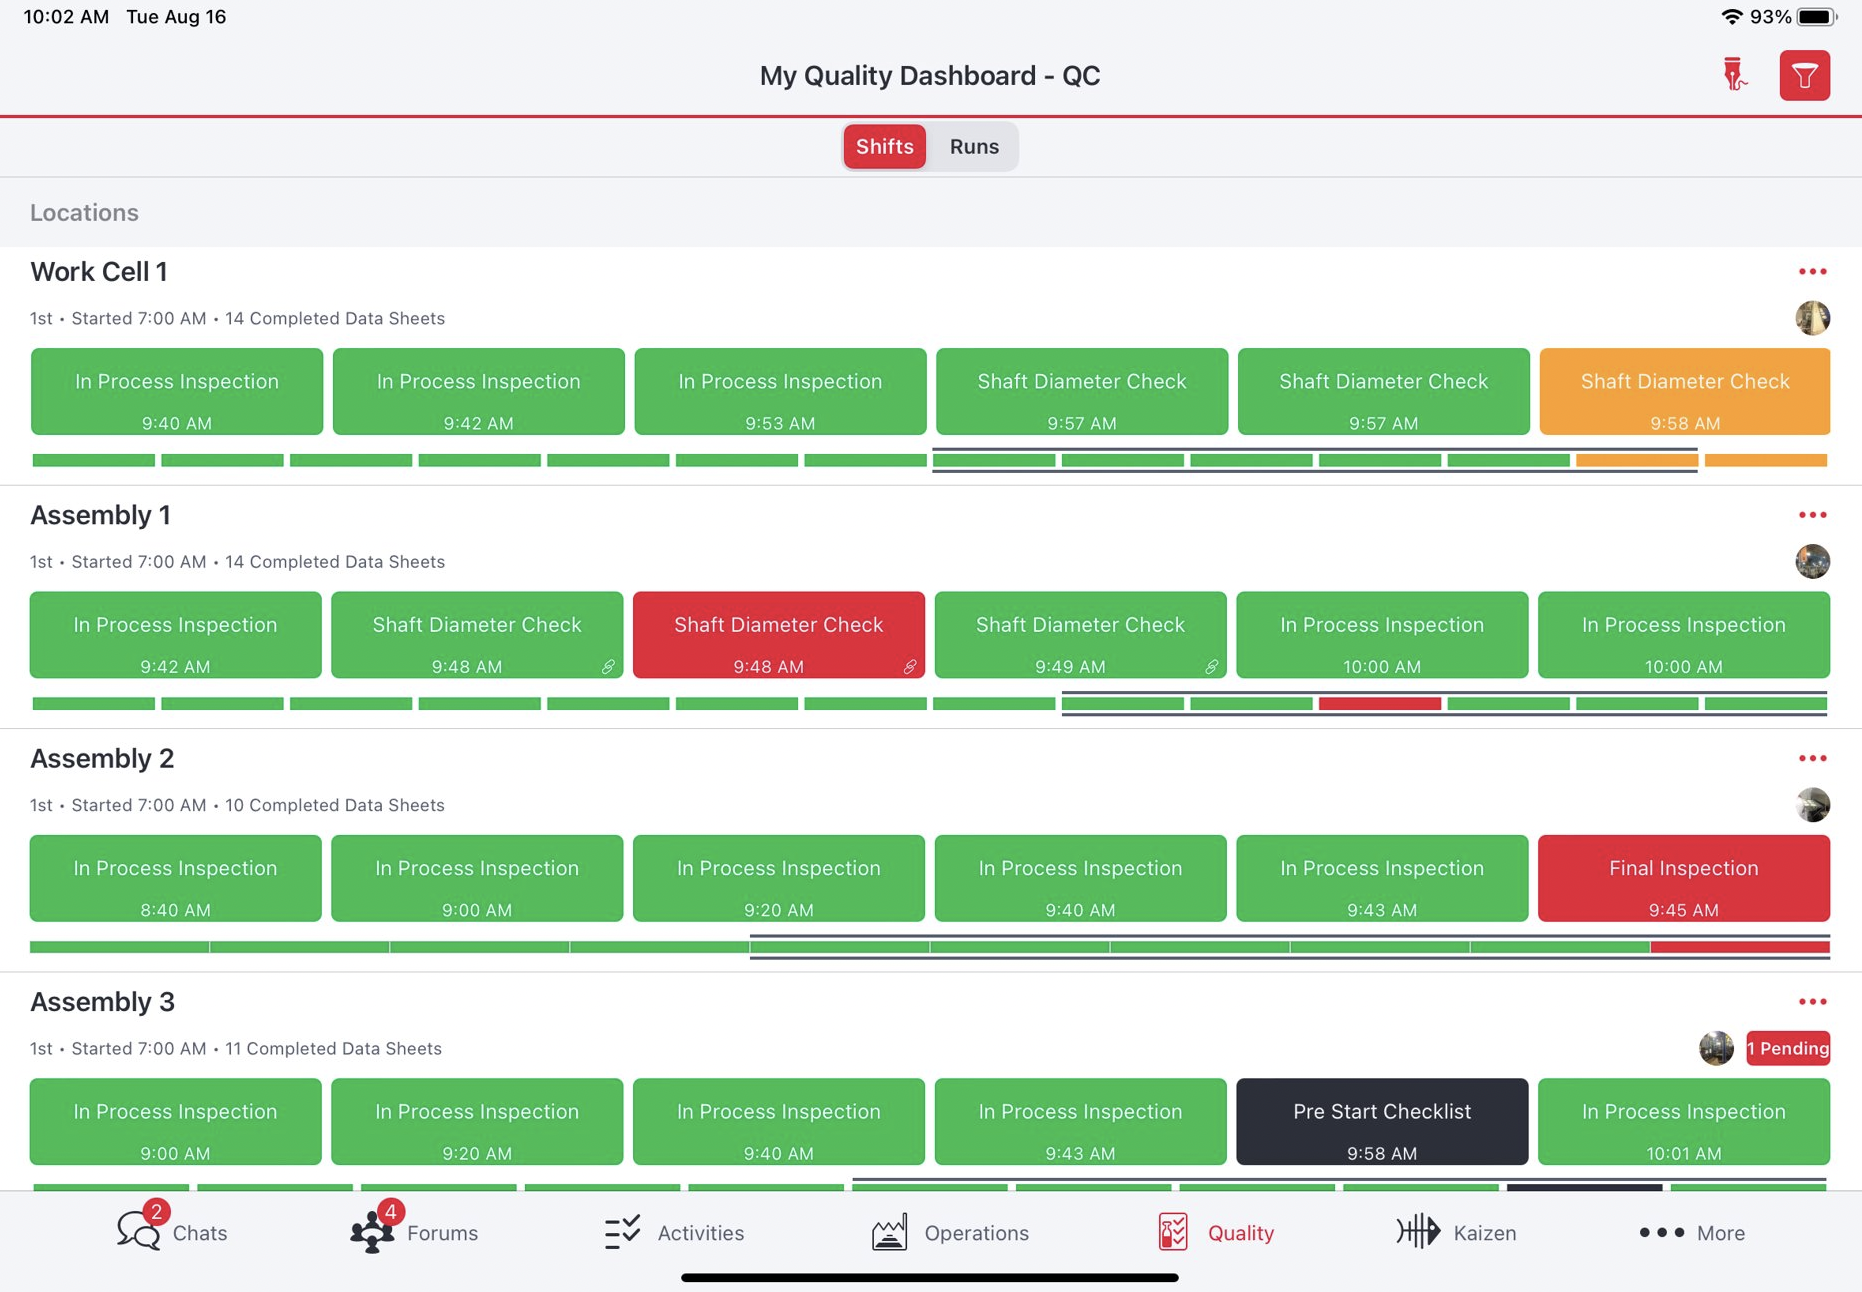 High level quality inspection by line dashboard showing whether a required check was completed (green), failed (red) or missed (black) with orange indicating an SPC violation. Each can be drilldown into to show the details and notes.